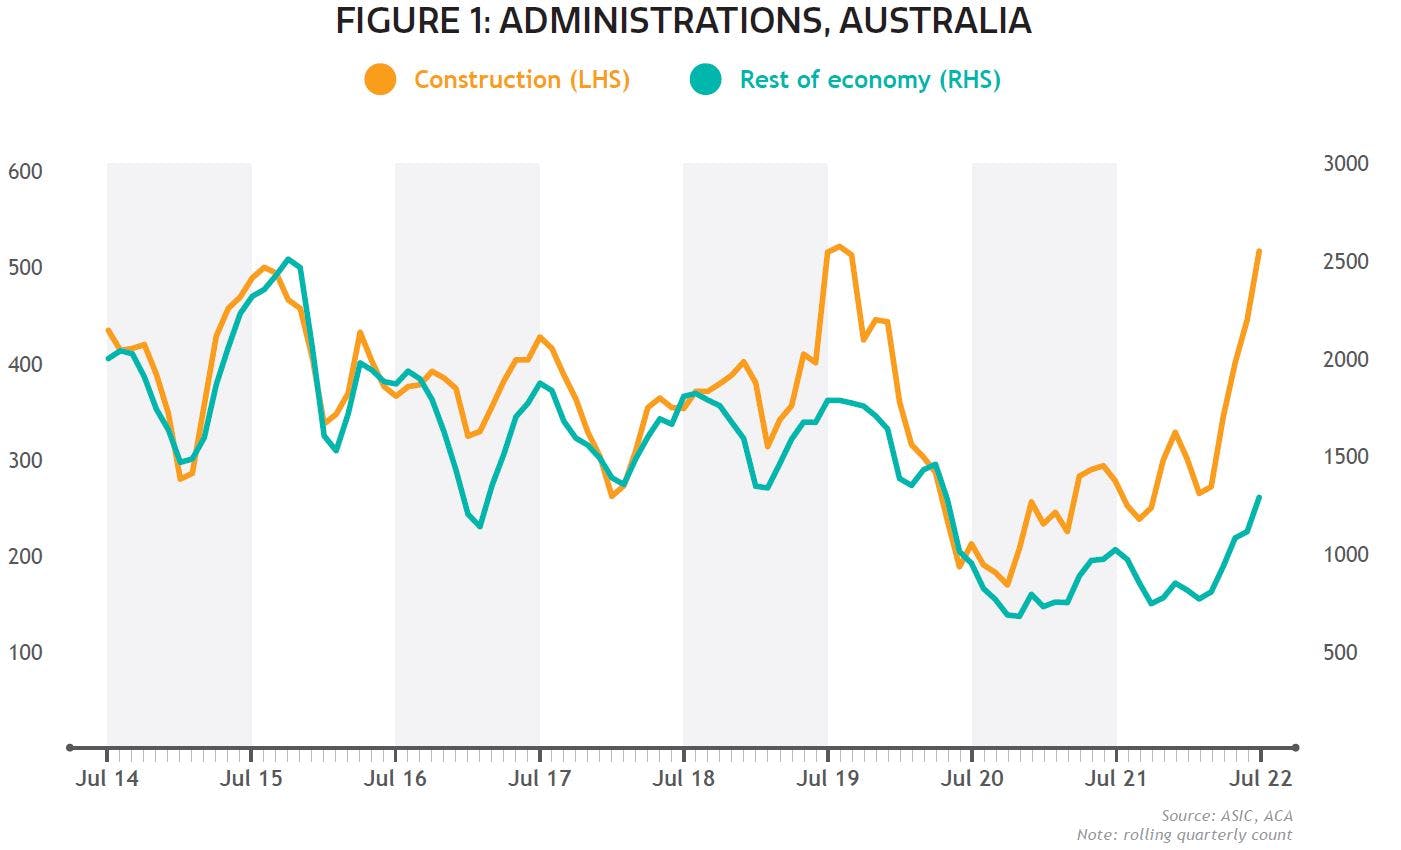 Figure 1 - Administrations Australia - Insolvency in the construction industry